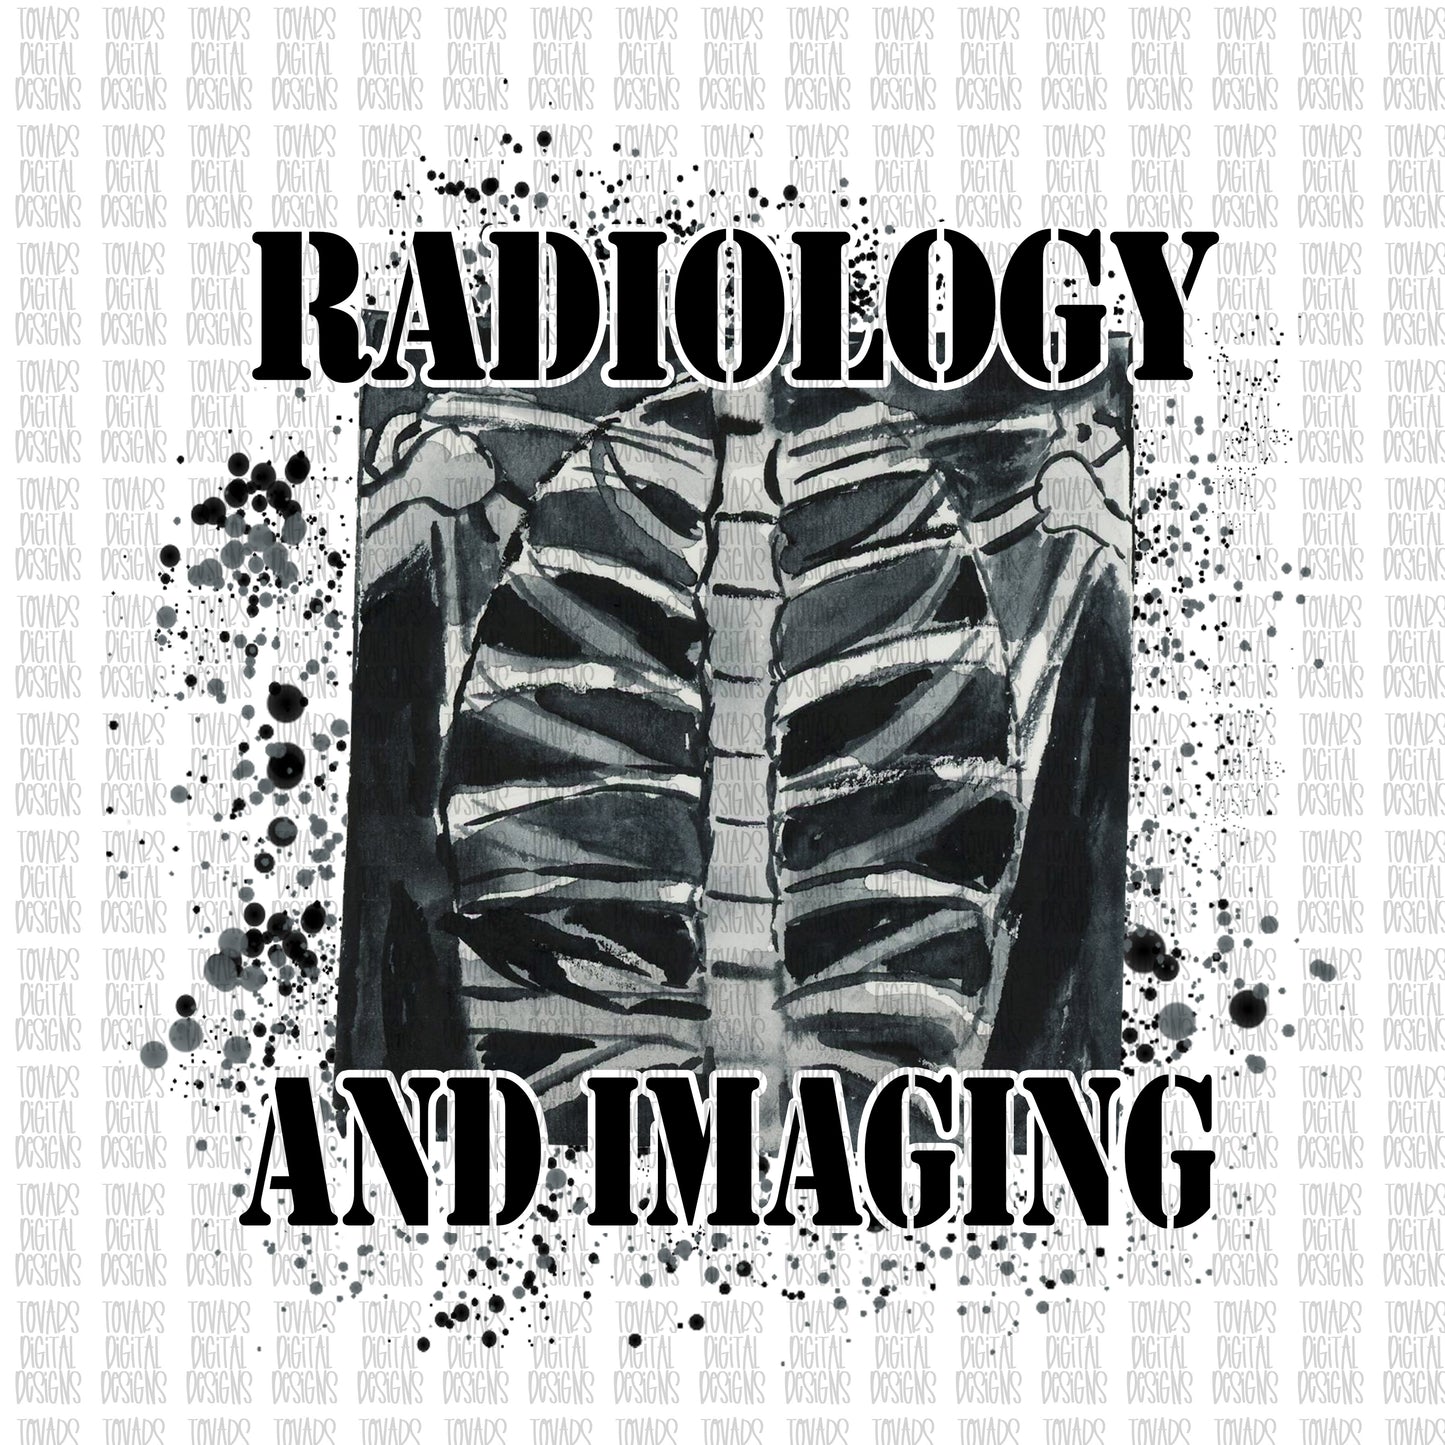 Copy of Radiology and imaging Sublimation Download, Radiology and imaging PNG, Sublimation Download, x-ray tech PNG, radiology sublimation design